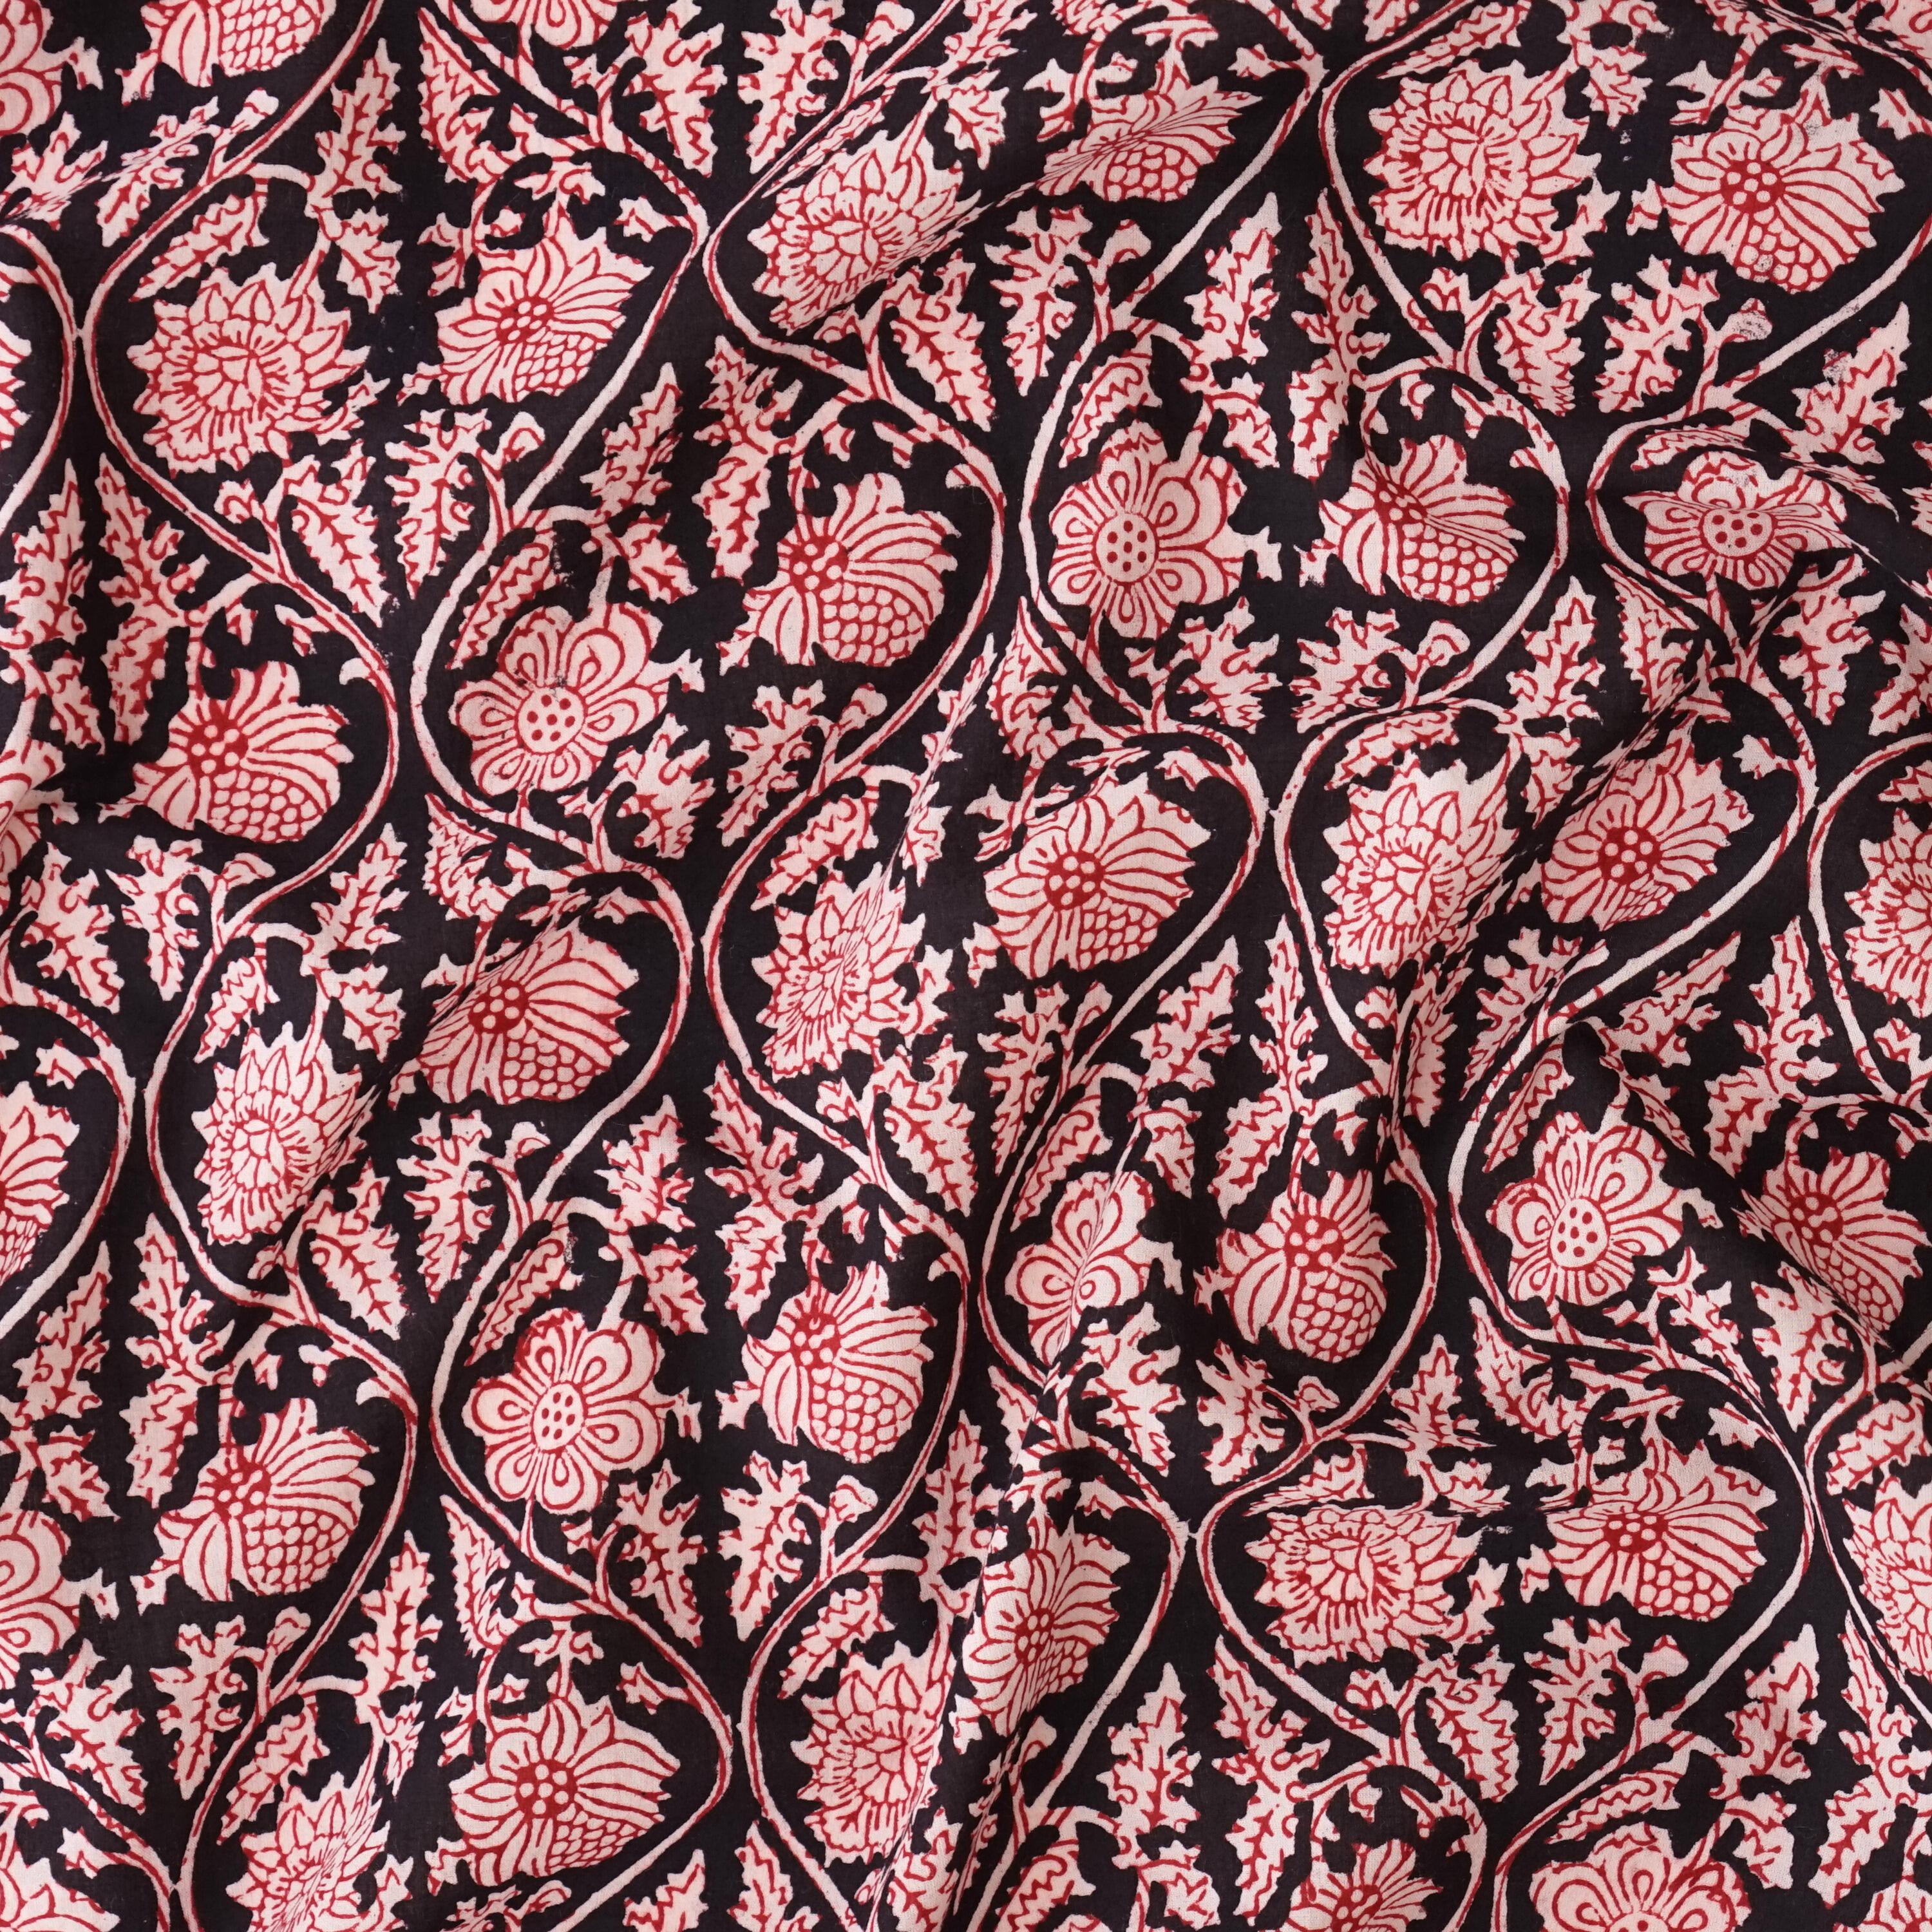 100% Block-Printed Cotton Fabric From India - Vinea Design - Iron Rust Black & Alizarin Red Dyes - Contrast